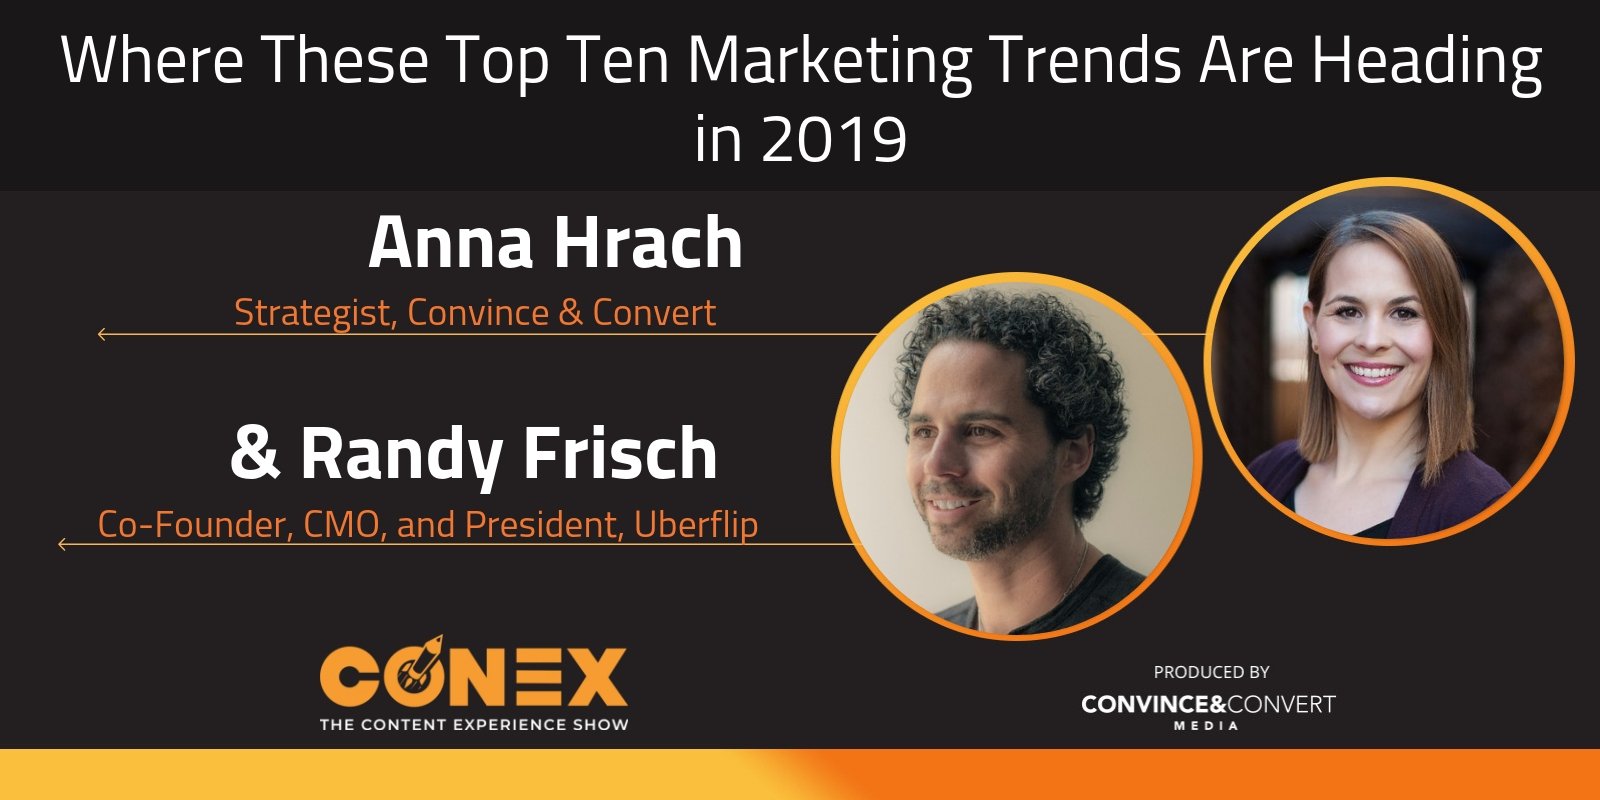 Where These Top Ten Marketing Trends Are Heading in 2019